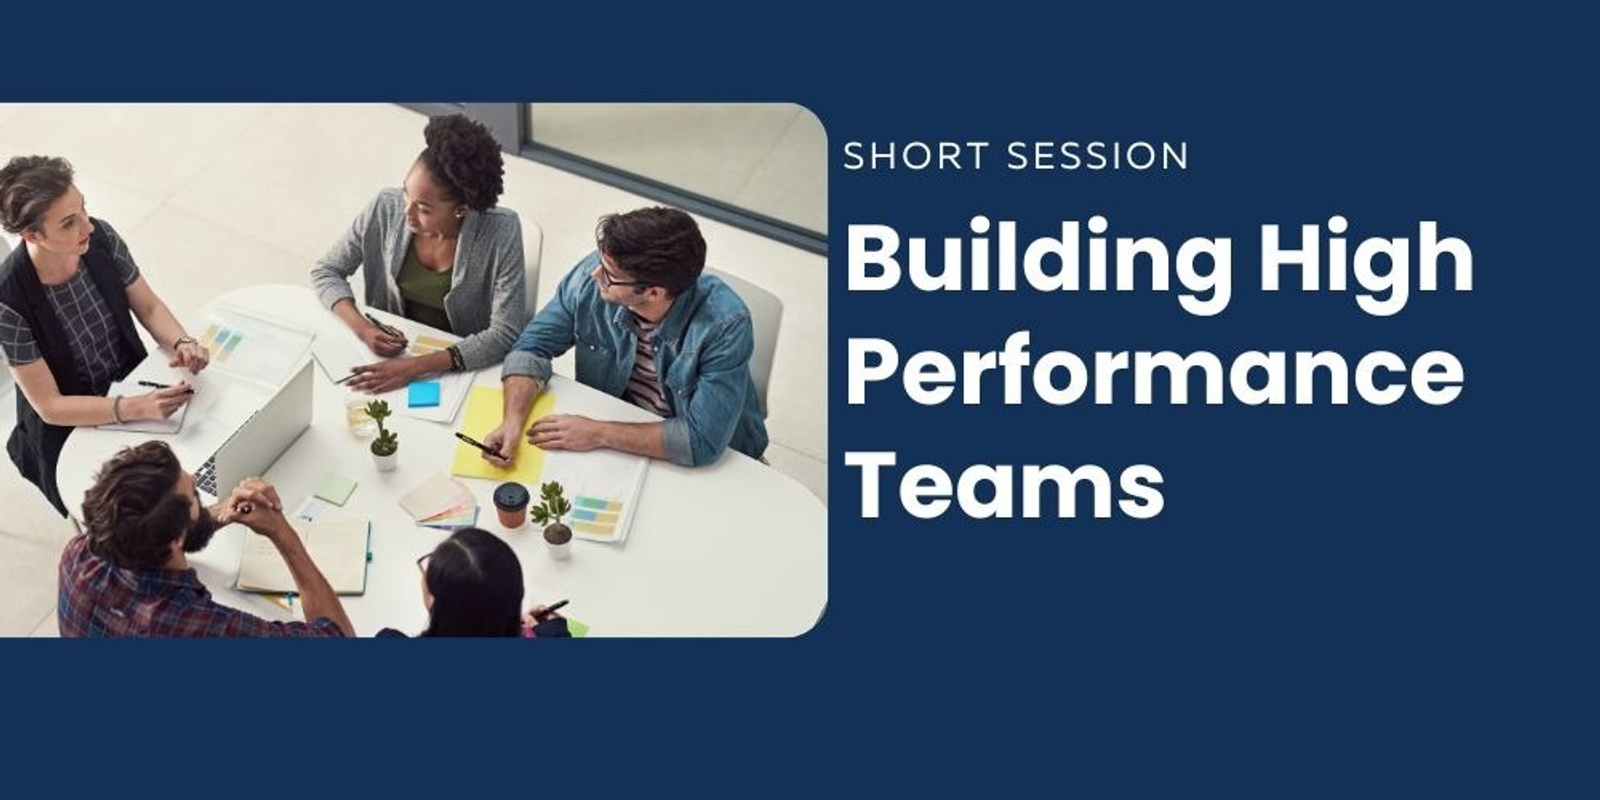 Banner image for Building High Performance Teams